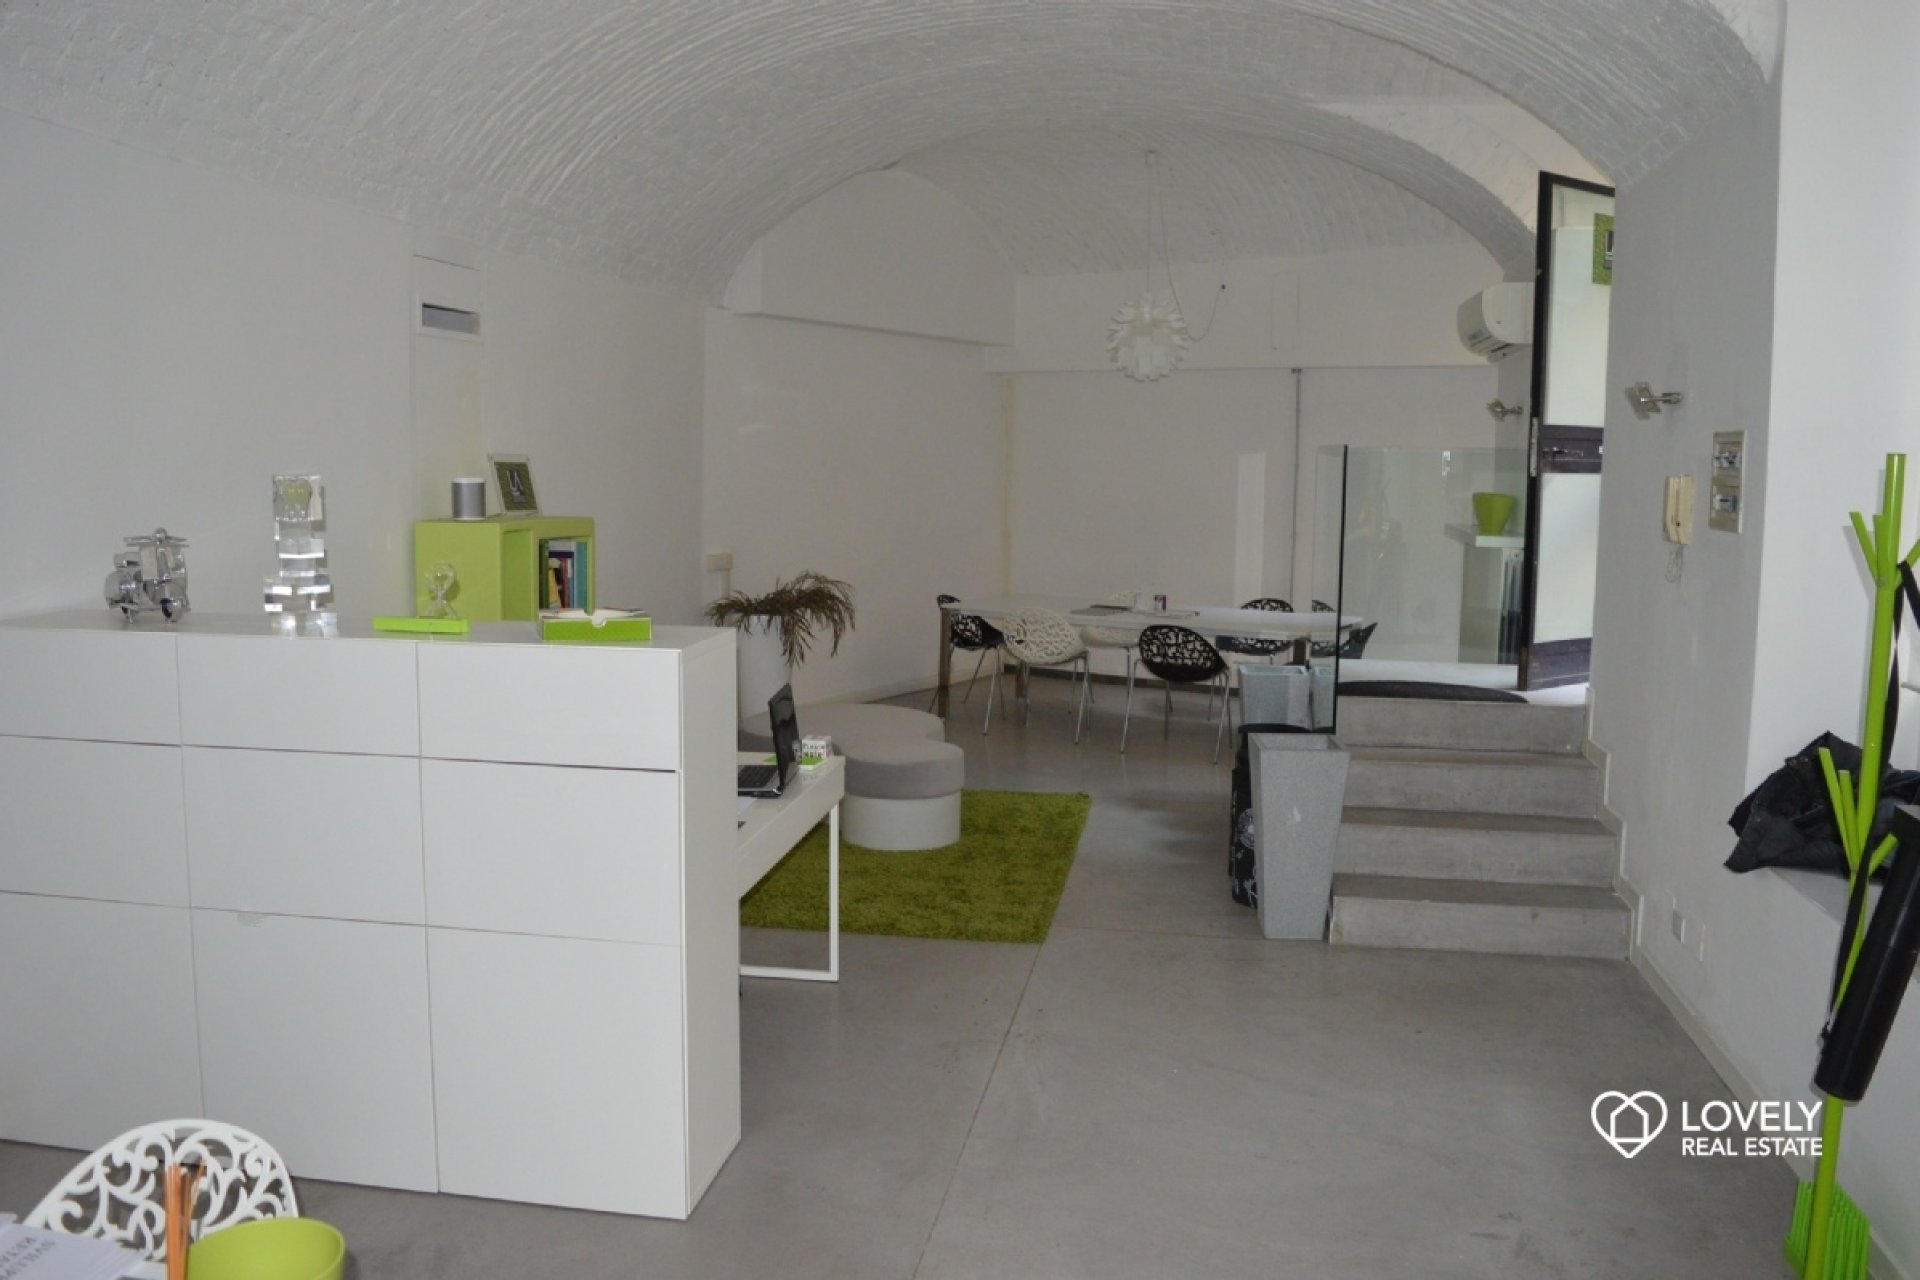 Affitto Office Milano - BEAUTIFUL SHOWROOM FOR RENT Locality Buenos Aires - Bacone - Morgagni